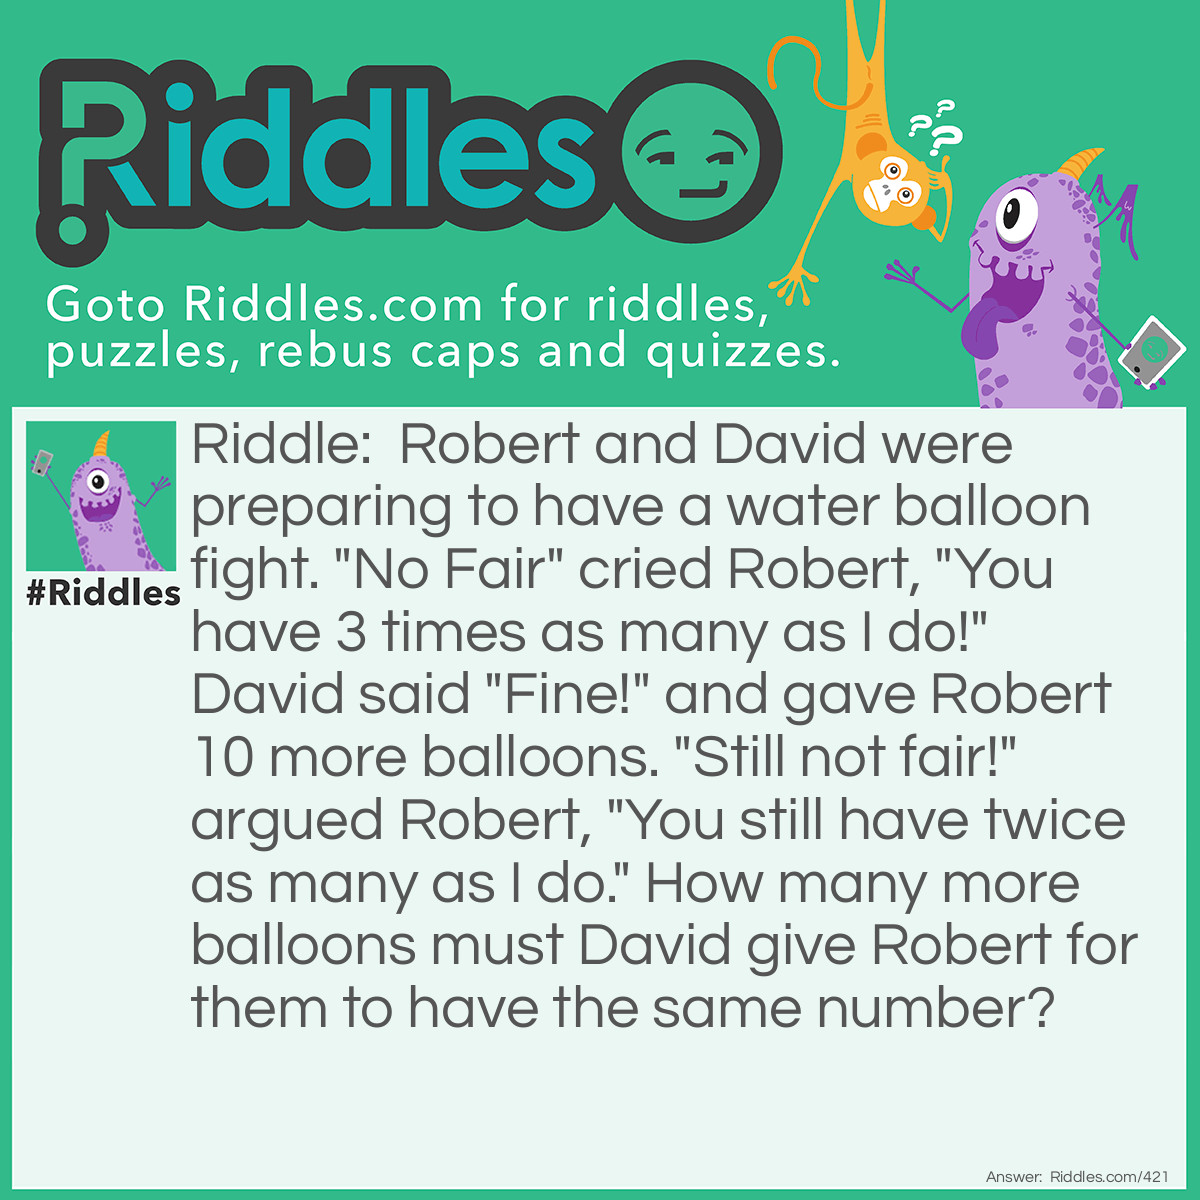 Riddle: Robert and David were preparing to have a water balloon fight. "No Fair" cried Robert, "You have 3 times as many as I do!" David said "Fine!" and gave Robert 10 more balloons. "Still not fair!" argued Robert, "You still have twice as many as I do." How many more balloons must David give Robert for them to have the same number? Answer: David must give Robert another 20 water balloons, giving them each 60. Robert started with 30 water balloons and David with 90.